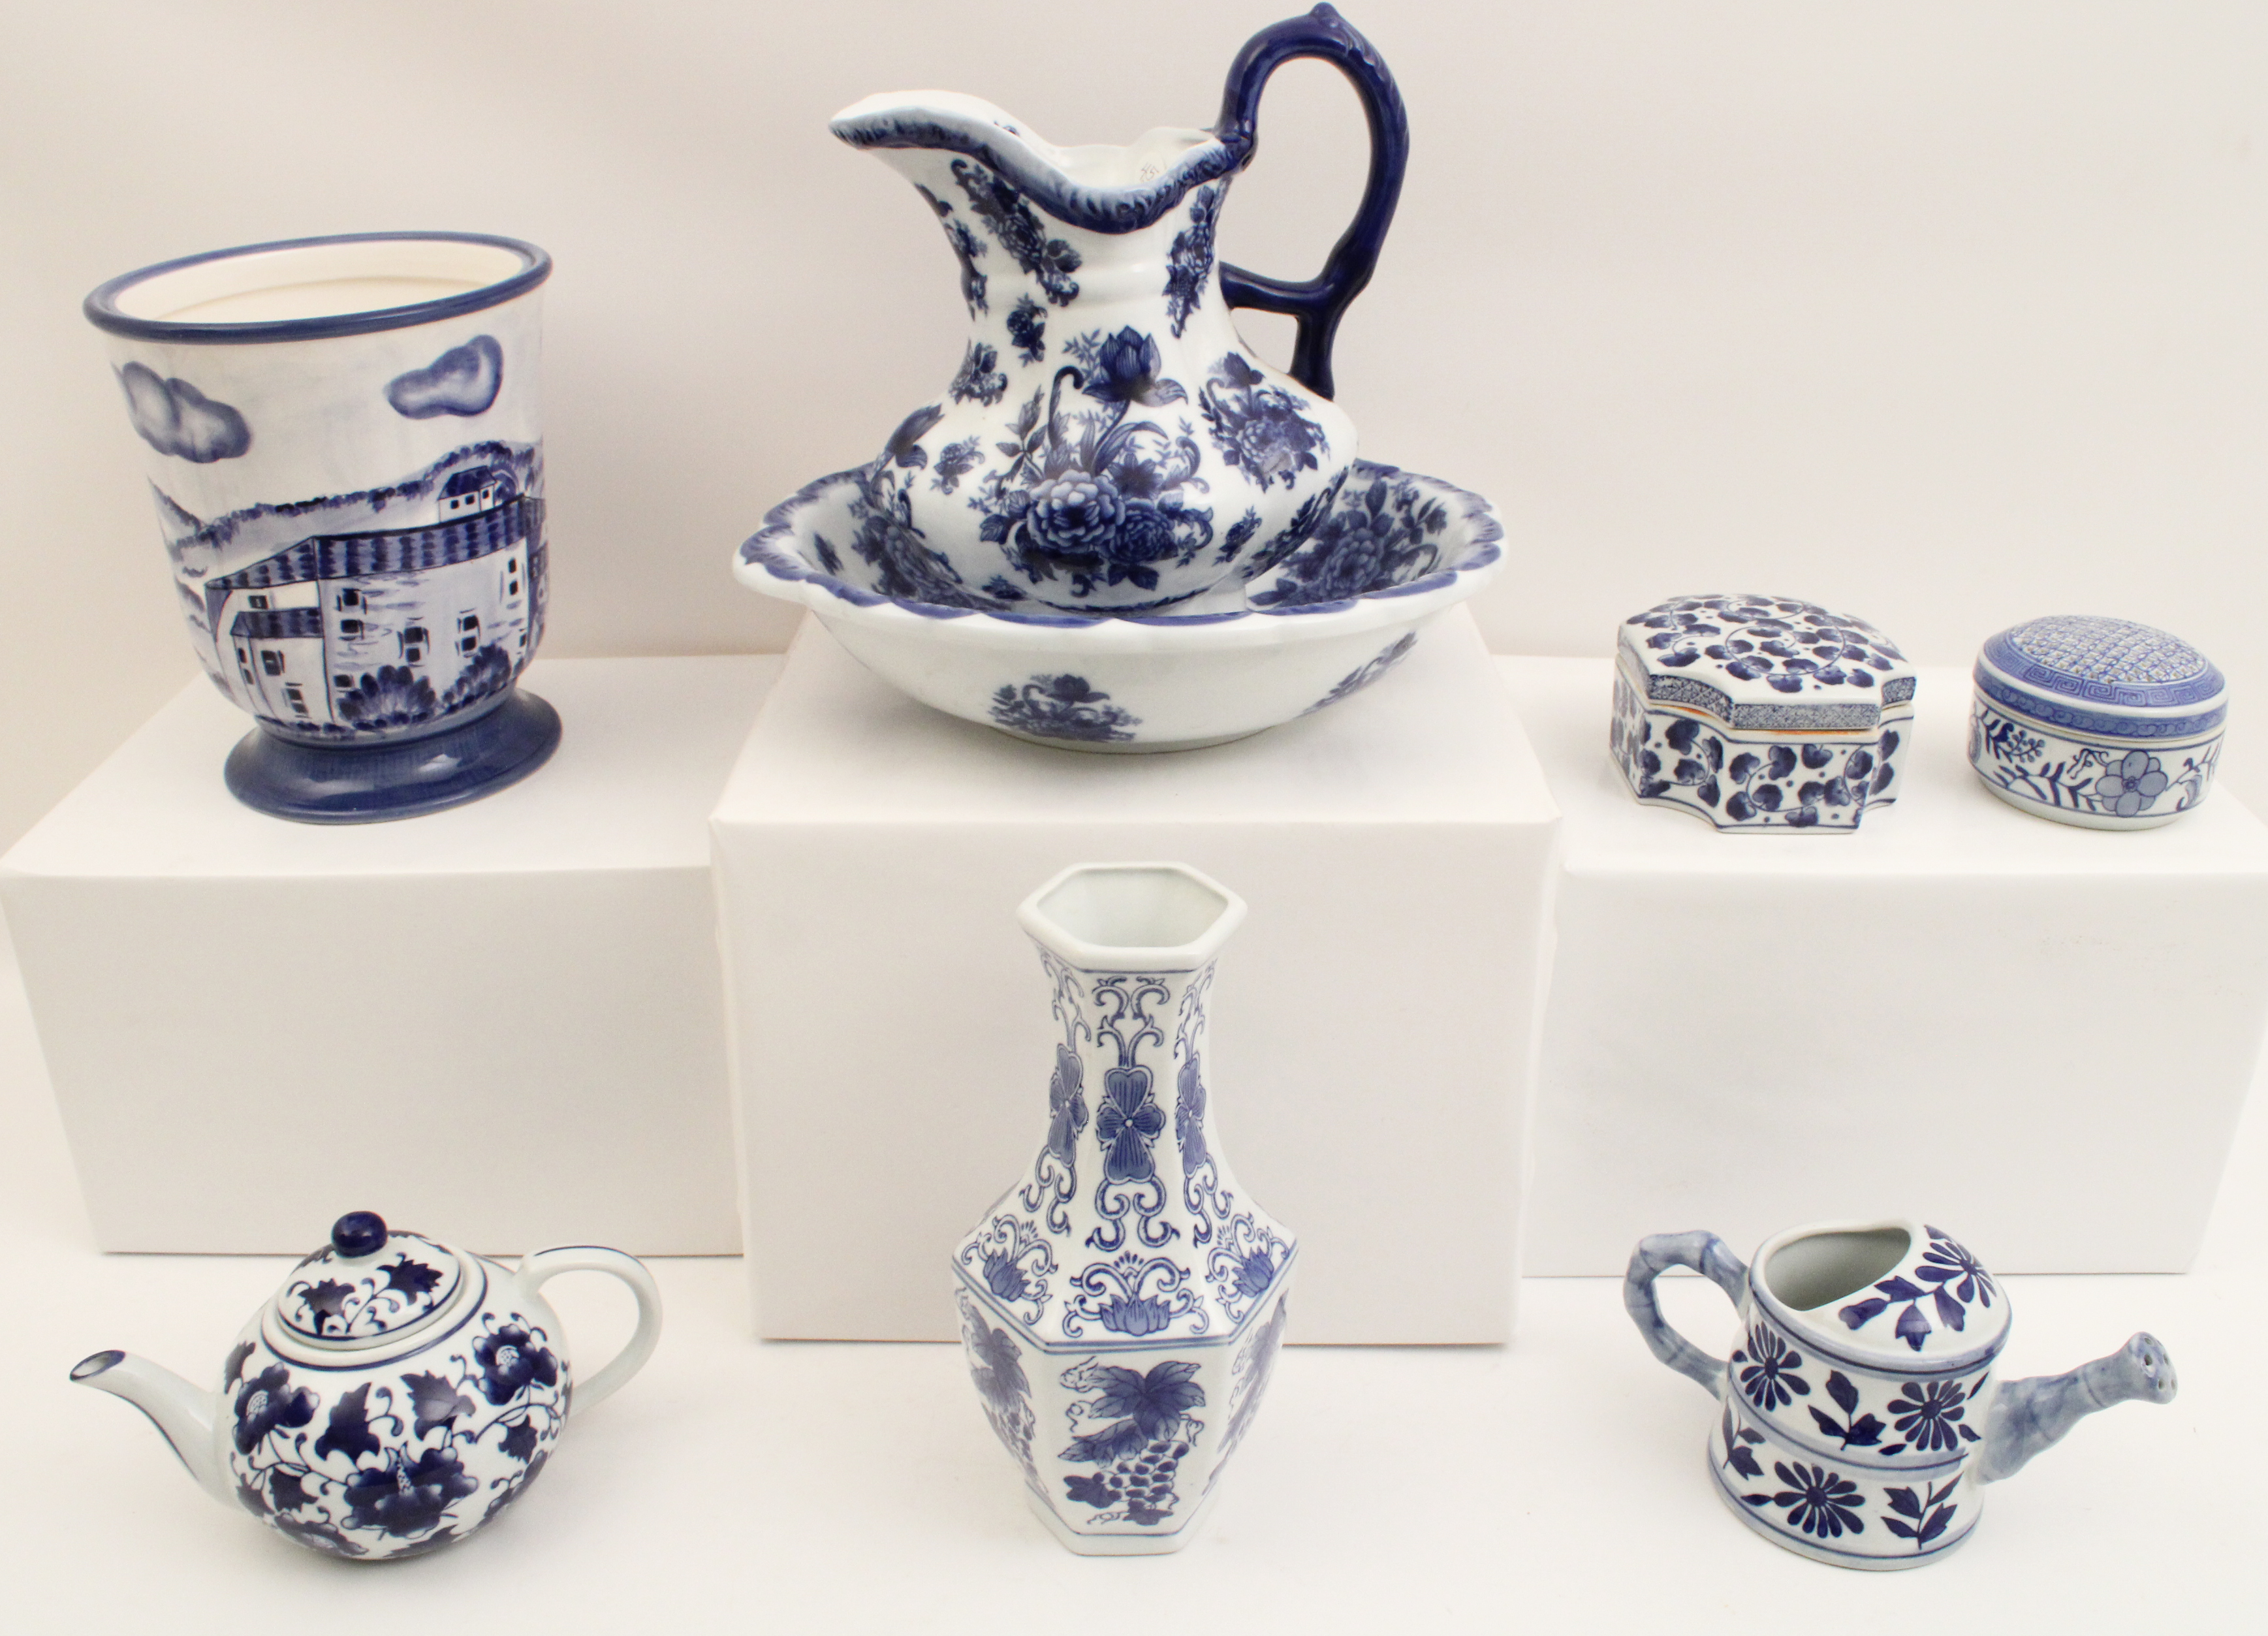 8 PIECE LOT OF BLUE AND WHITE PORCELAIN 35f0d8